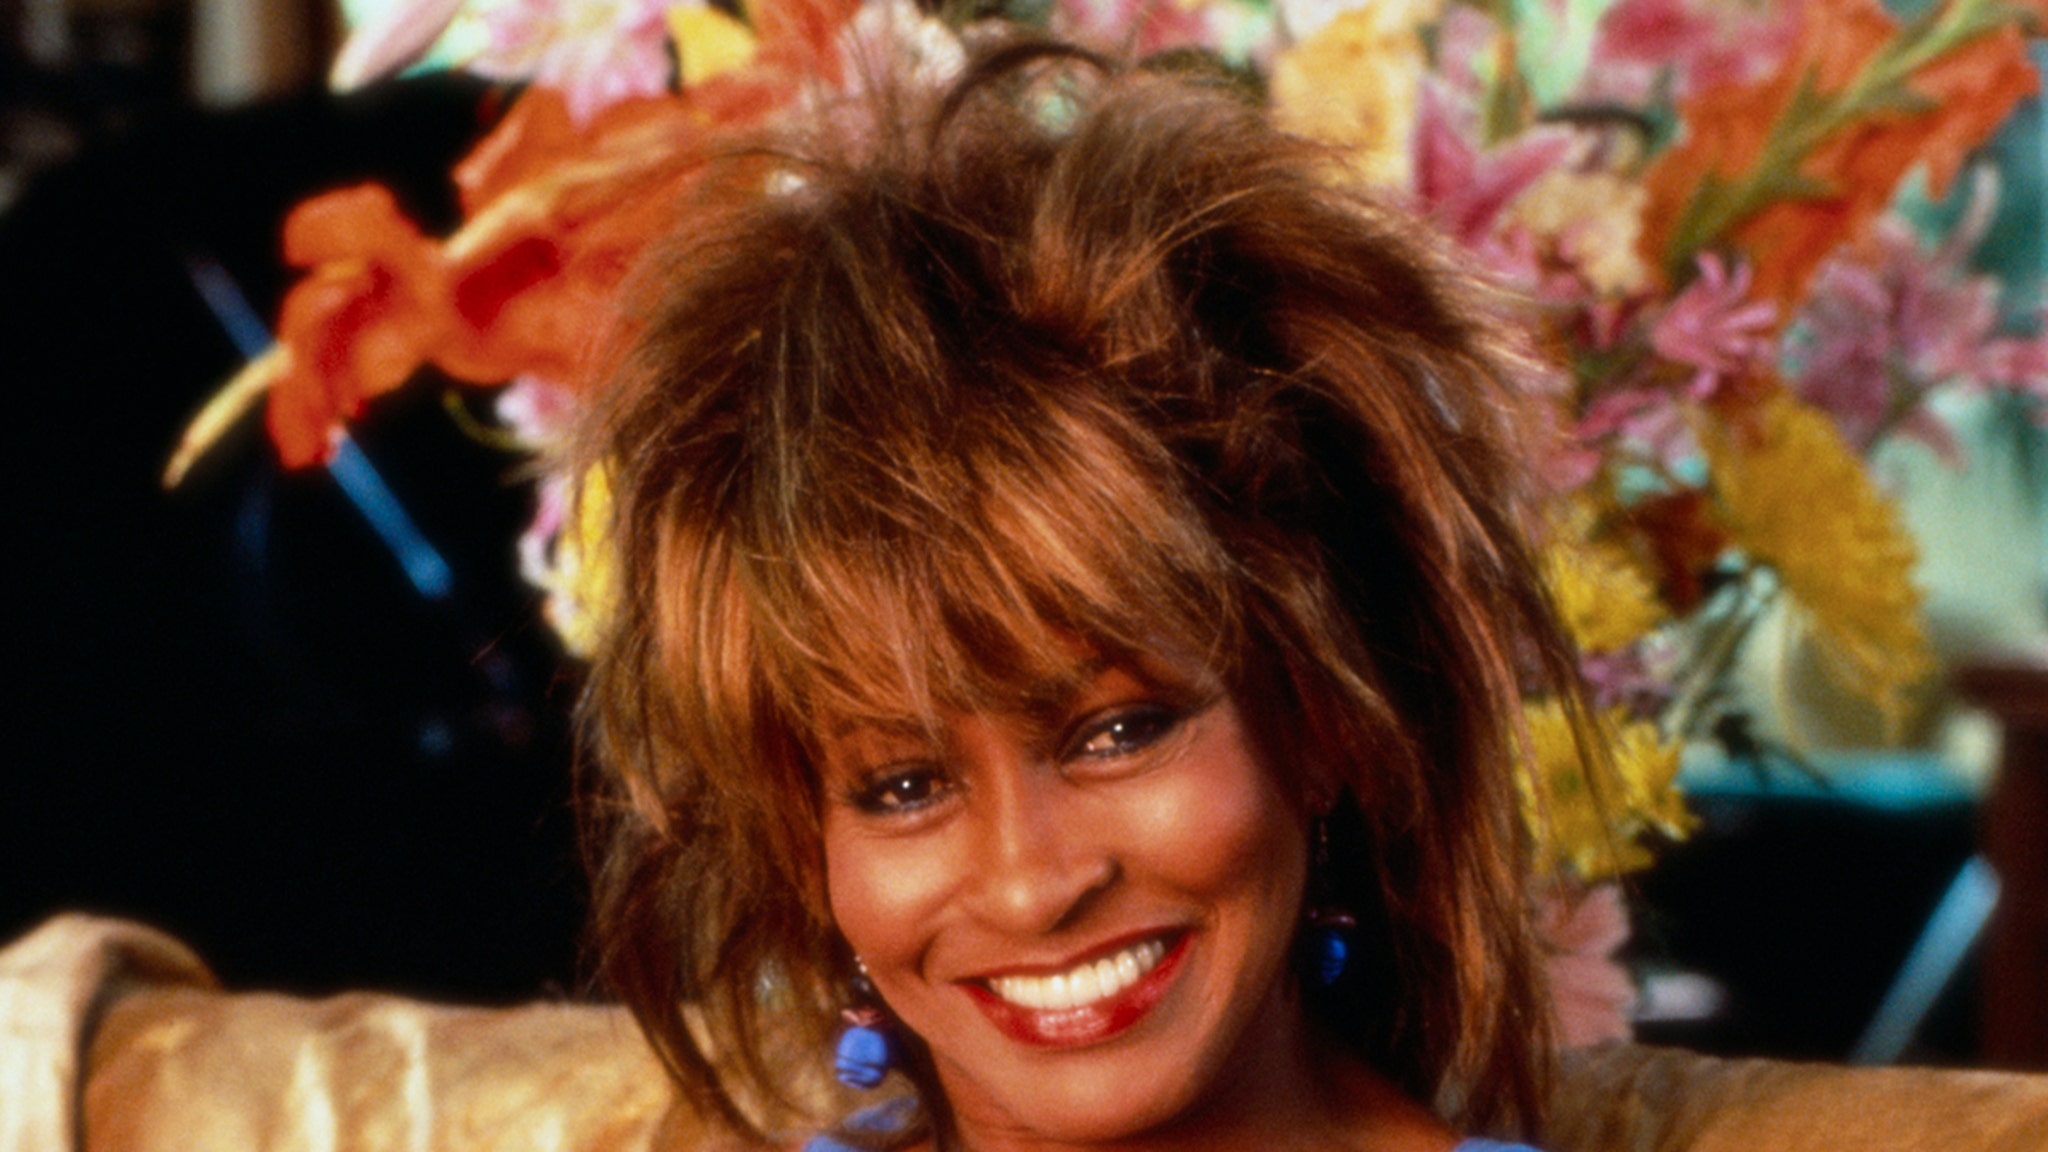 Tina Turner, ‘Queen of Rock ‘n’ Roll,’ Dead at 83